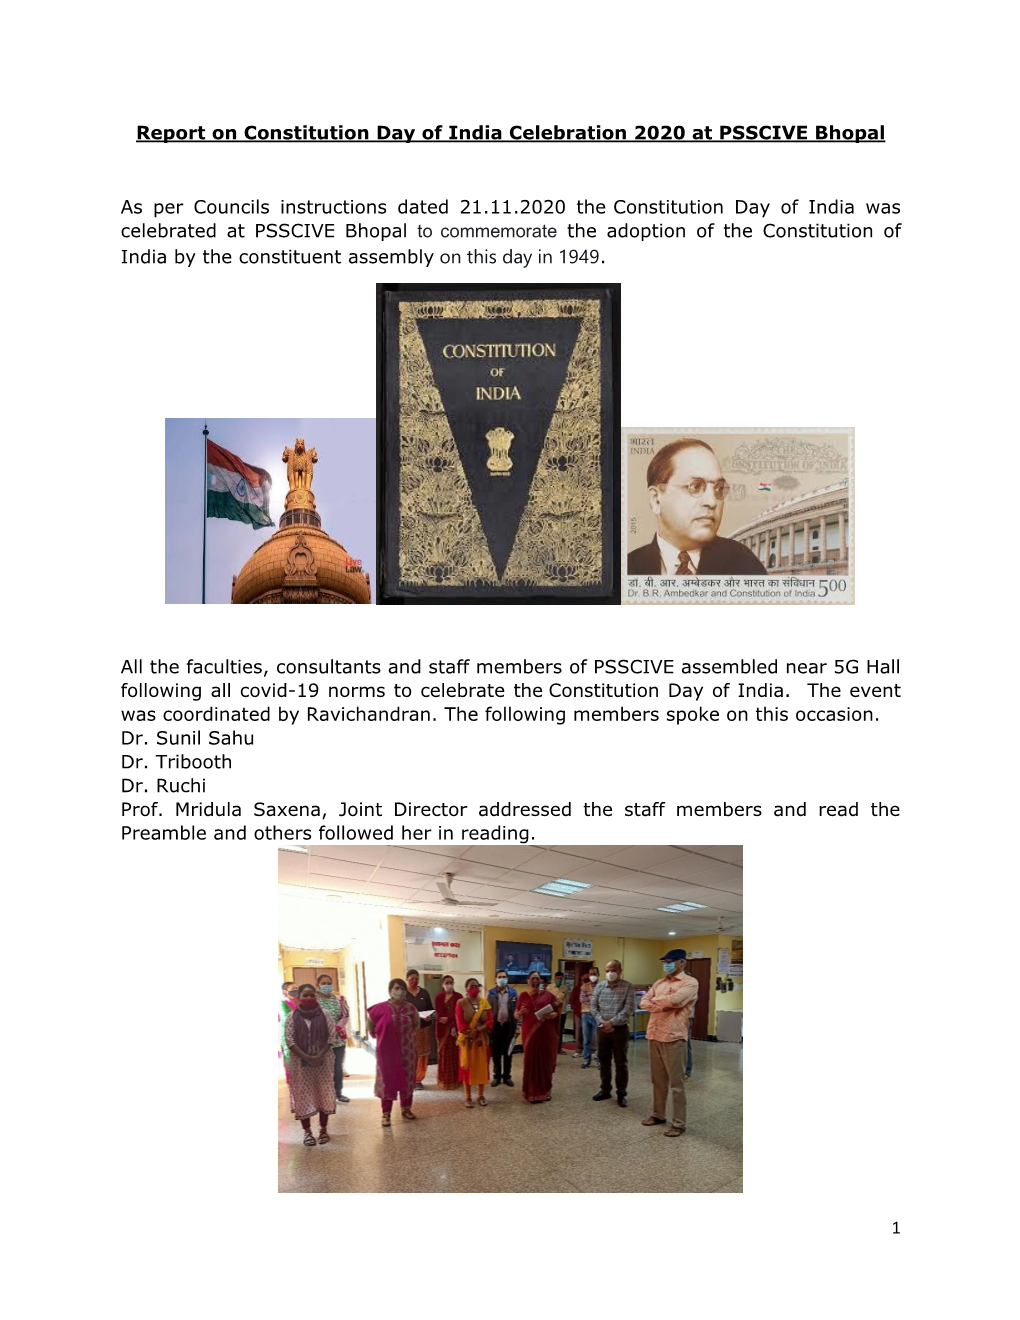 1 Report on Constitution Day of India Celebration 2020 at PSSCIVE Bhopal As Per Councils Instructions Dated 21.11.2020 the Const